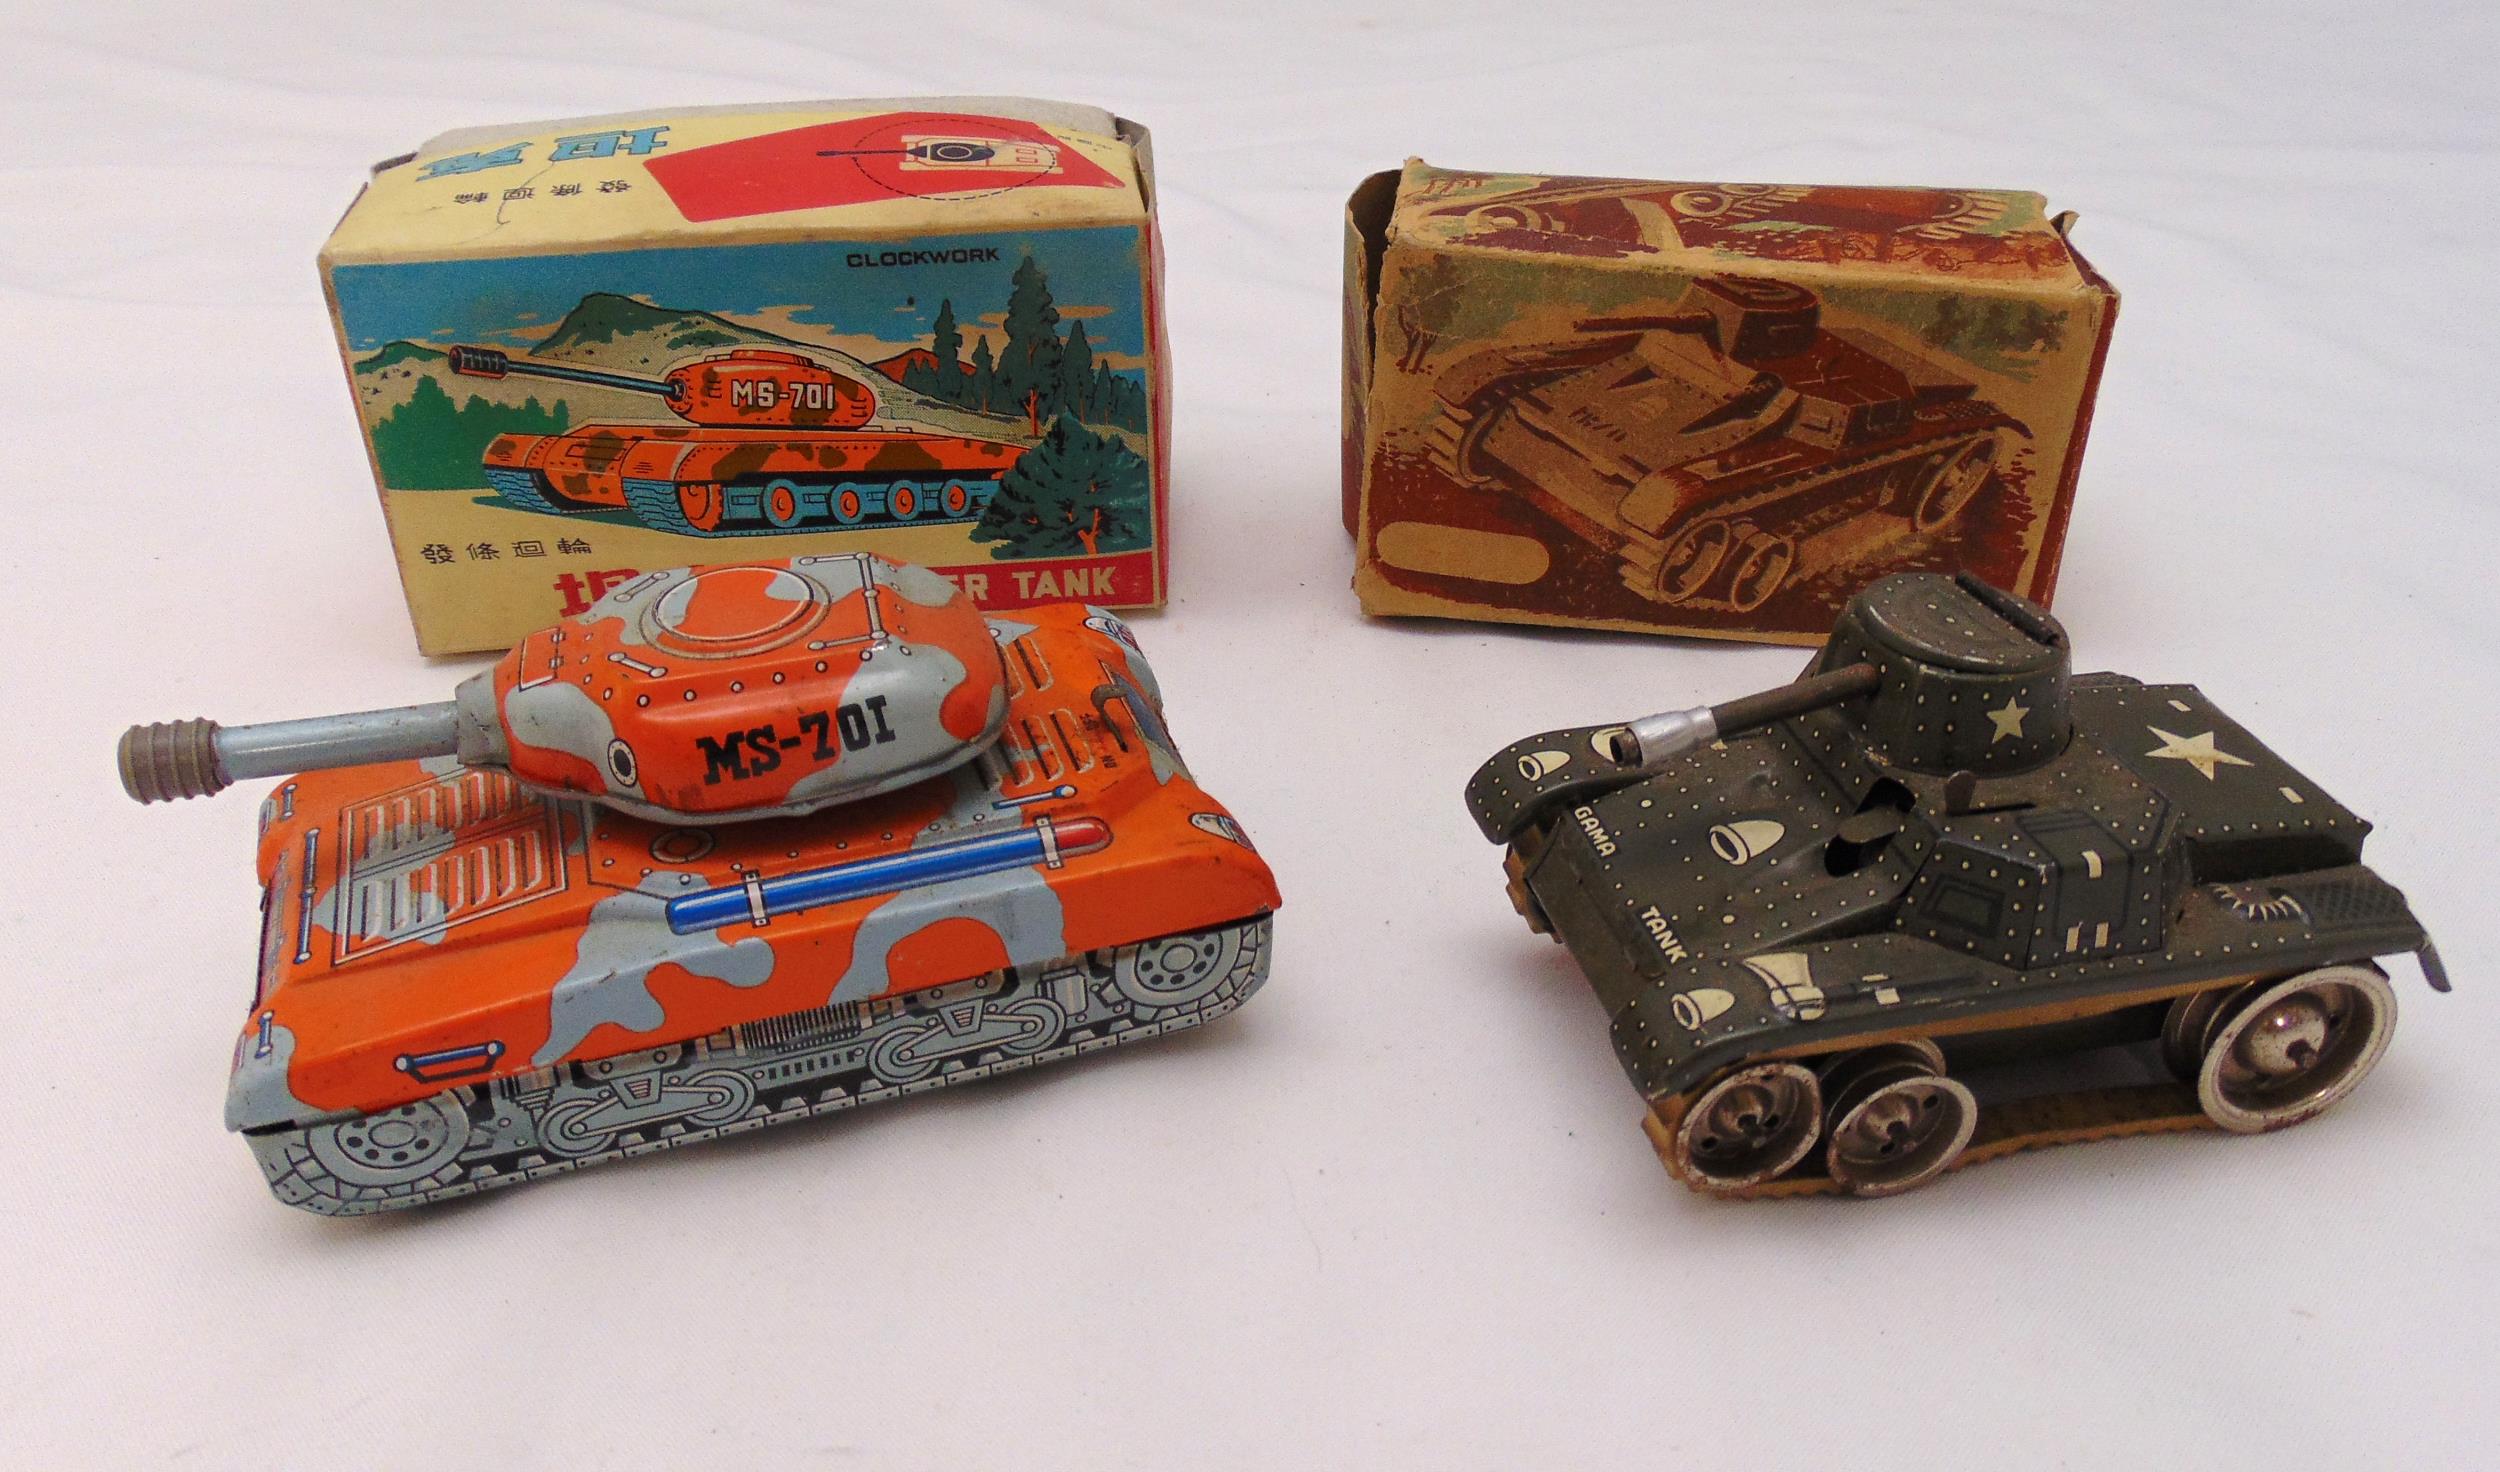 Two vintage litho tin plate tanks to include Gama Tank and a Super Tank, both in original packaging